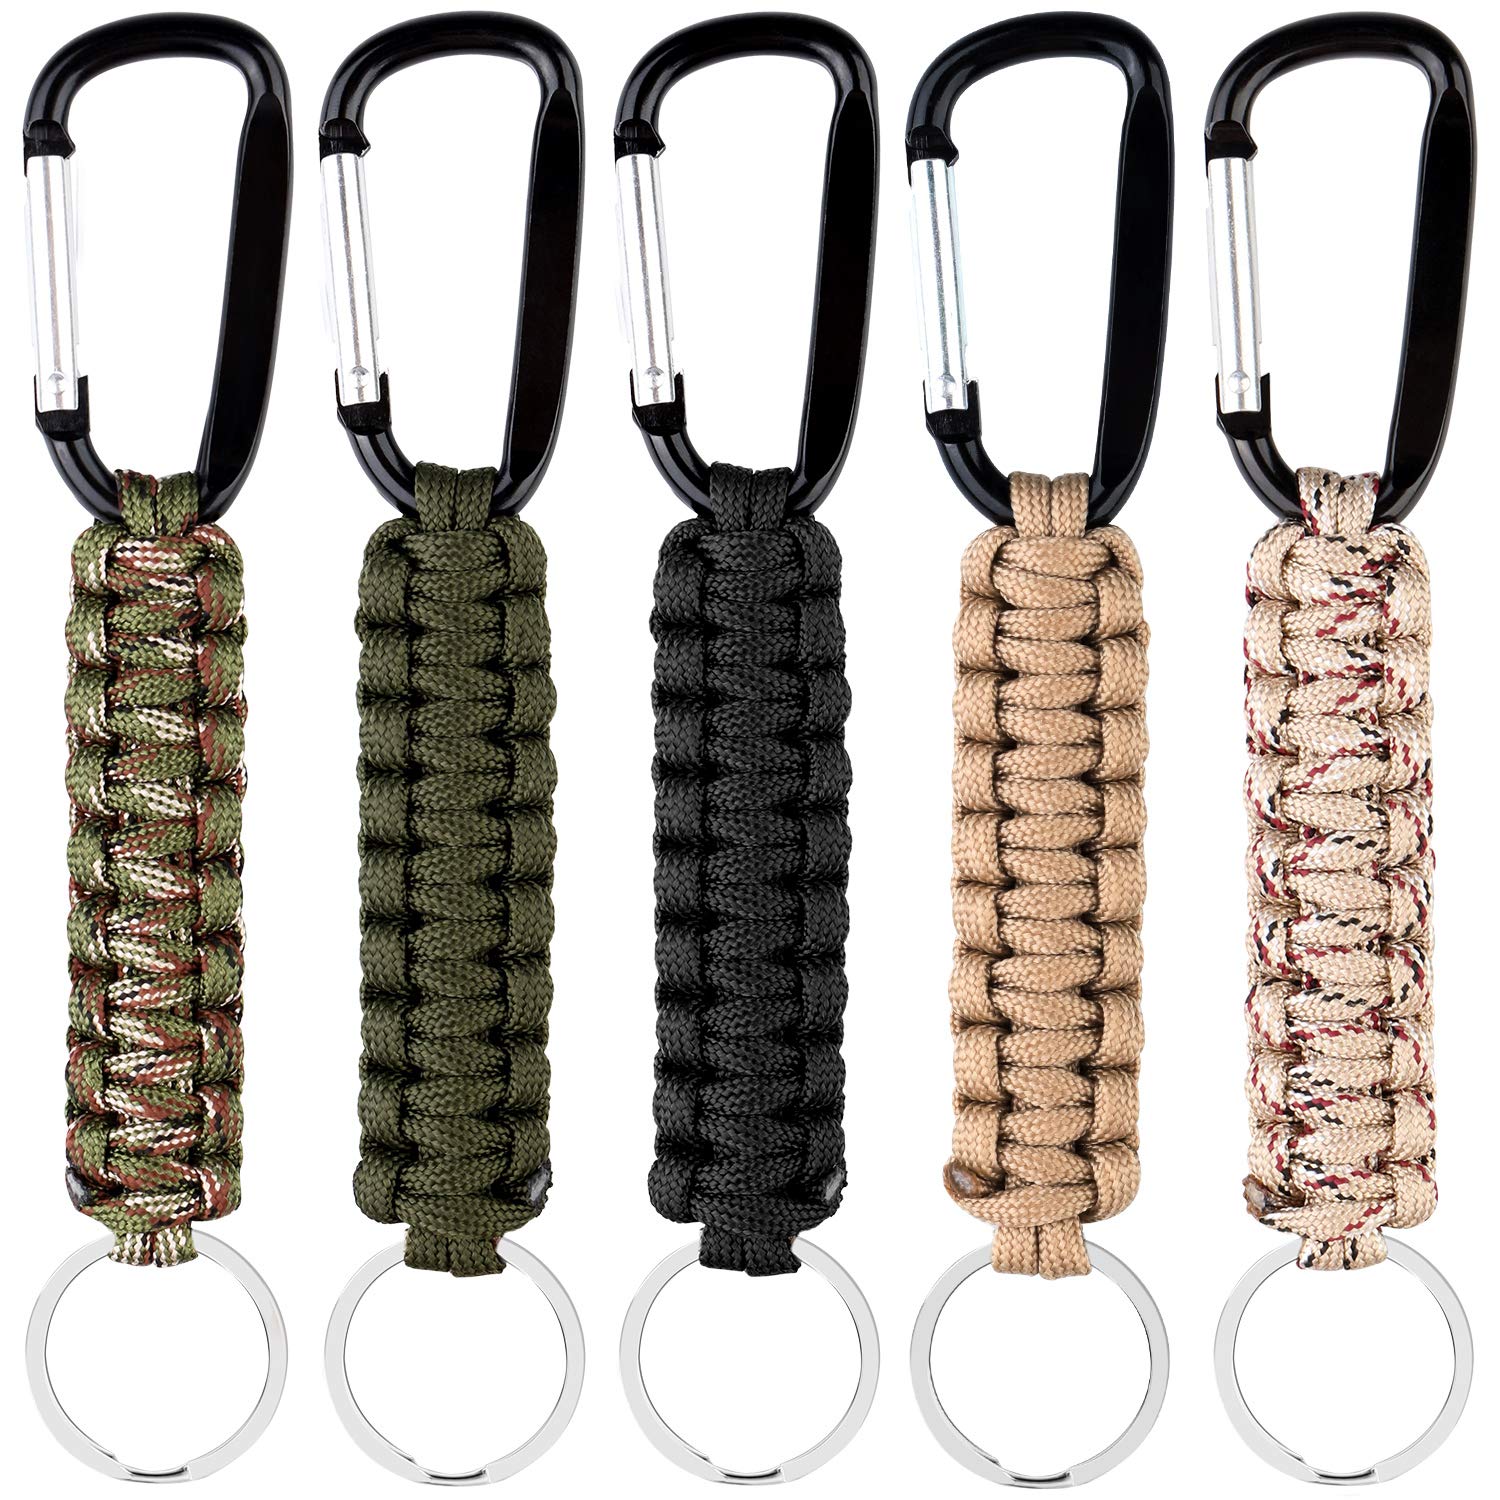 Auranso 5 Pcs Paracord Keyring with Carabiners Lanyard Clip Keychain Strong Steel Key Holder for Outdoor Camping Hiking Backpack Survival Tool